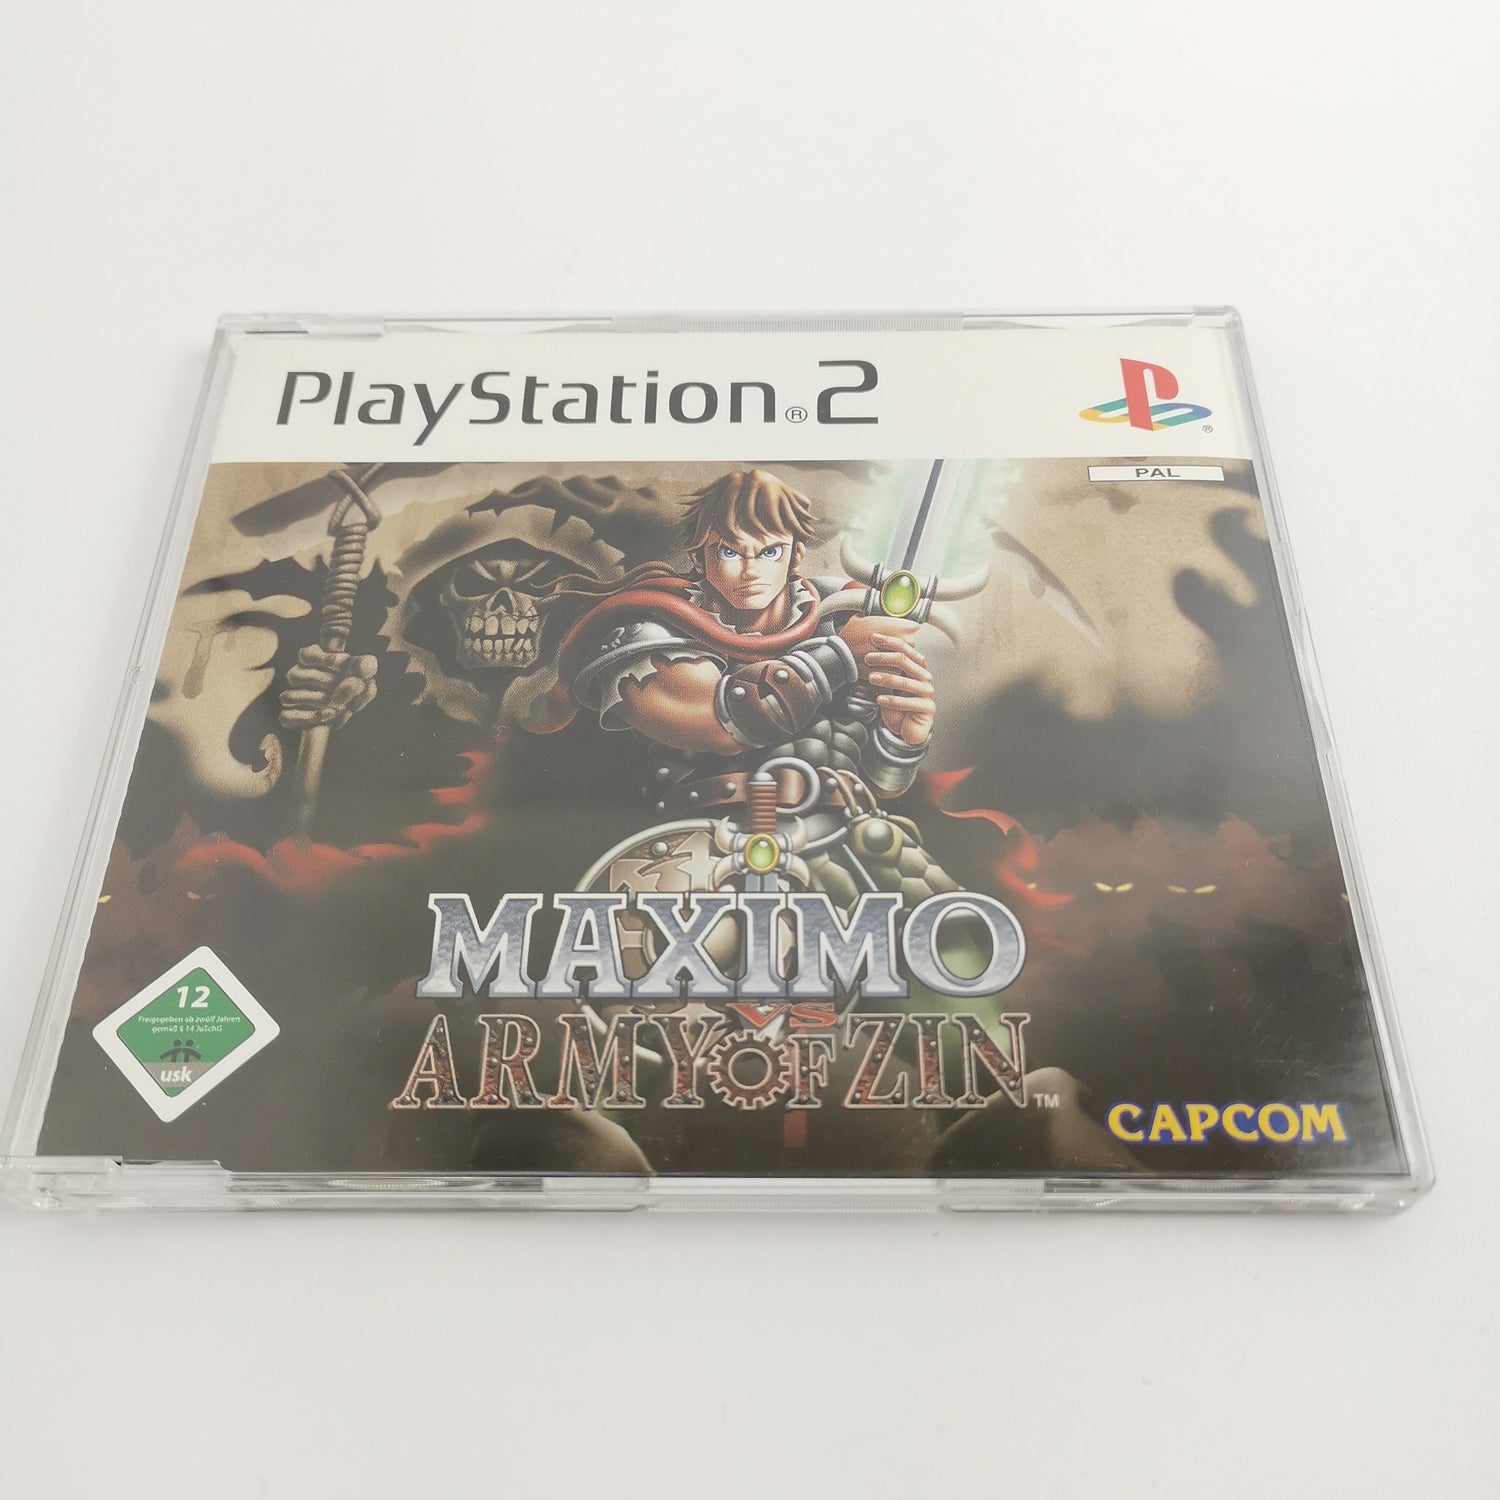 Sony Playstation 2 Promo Game: Maximo Army of Zin - Full Version | PS2 OVP PAL